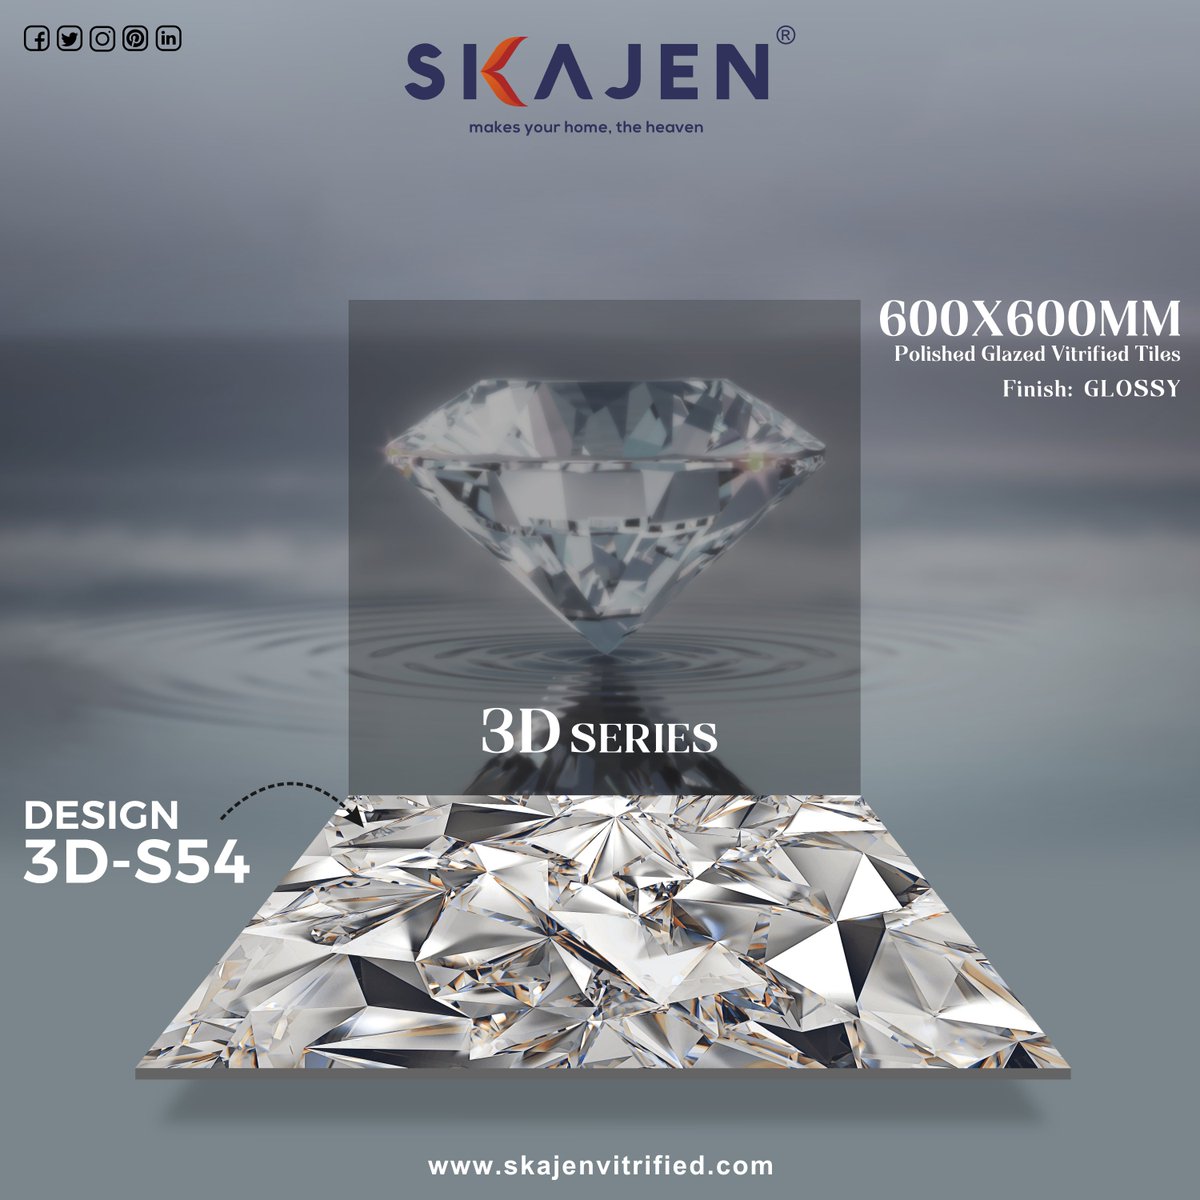 Install the subtle grace in your spaces and transform them into indulging interiors with an exclusive tiles collection our 3D design tiles.

#3dtiles #3dseries #3dDesign #glossytiles #glazedtiles #skajen #glazed #vitrified #design #architecture #tile #interior #homedecor